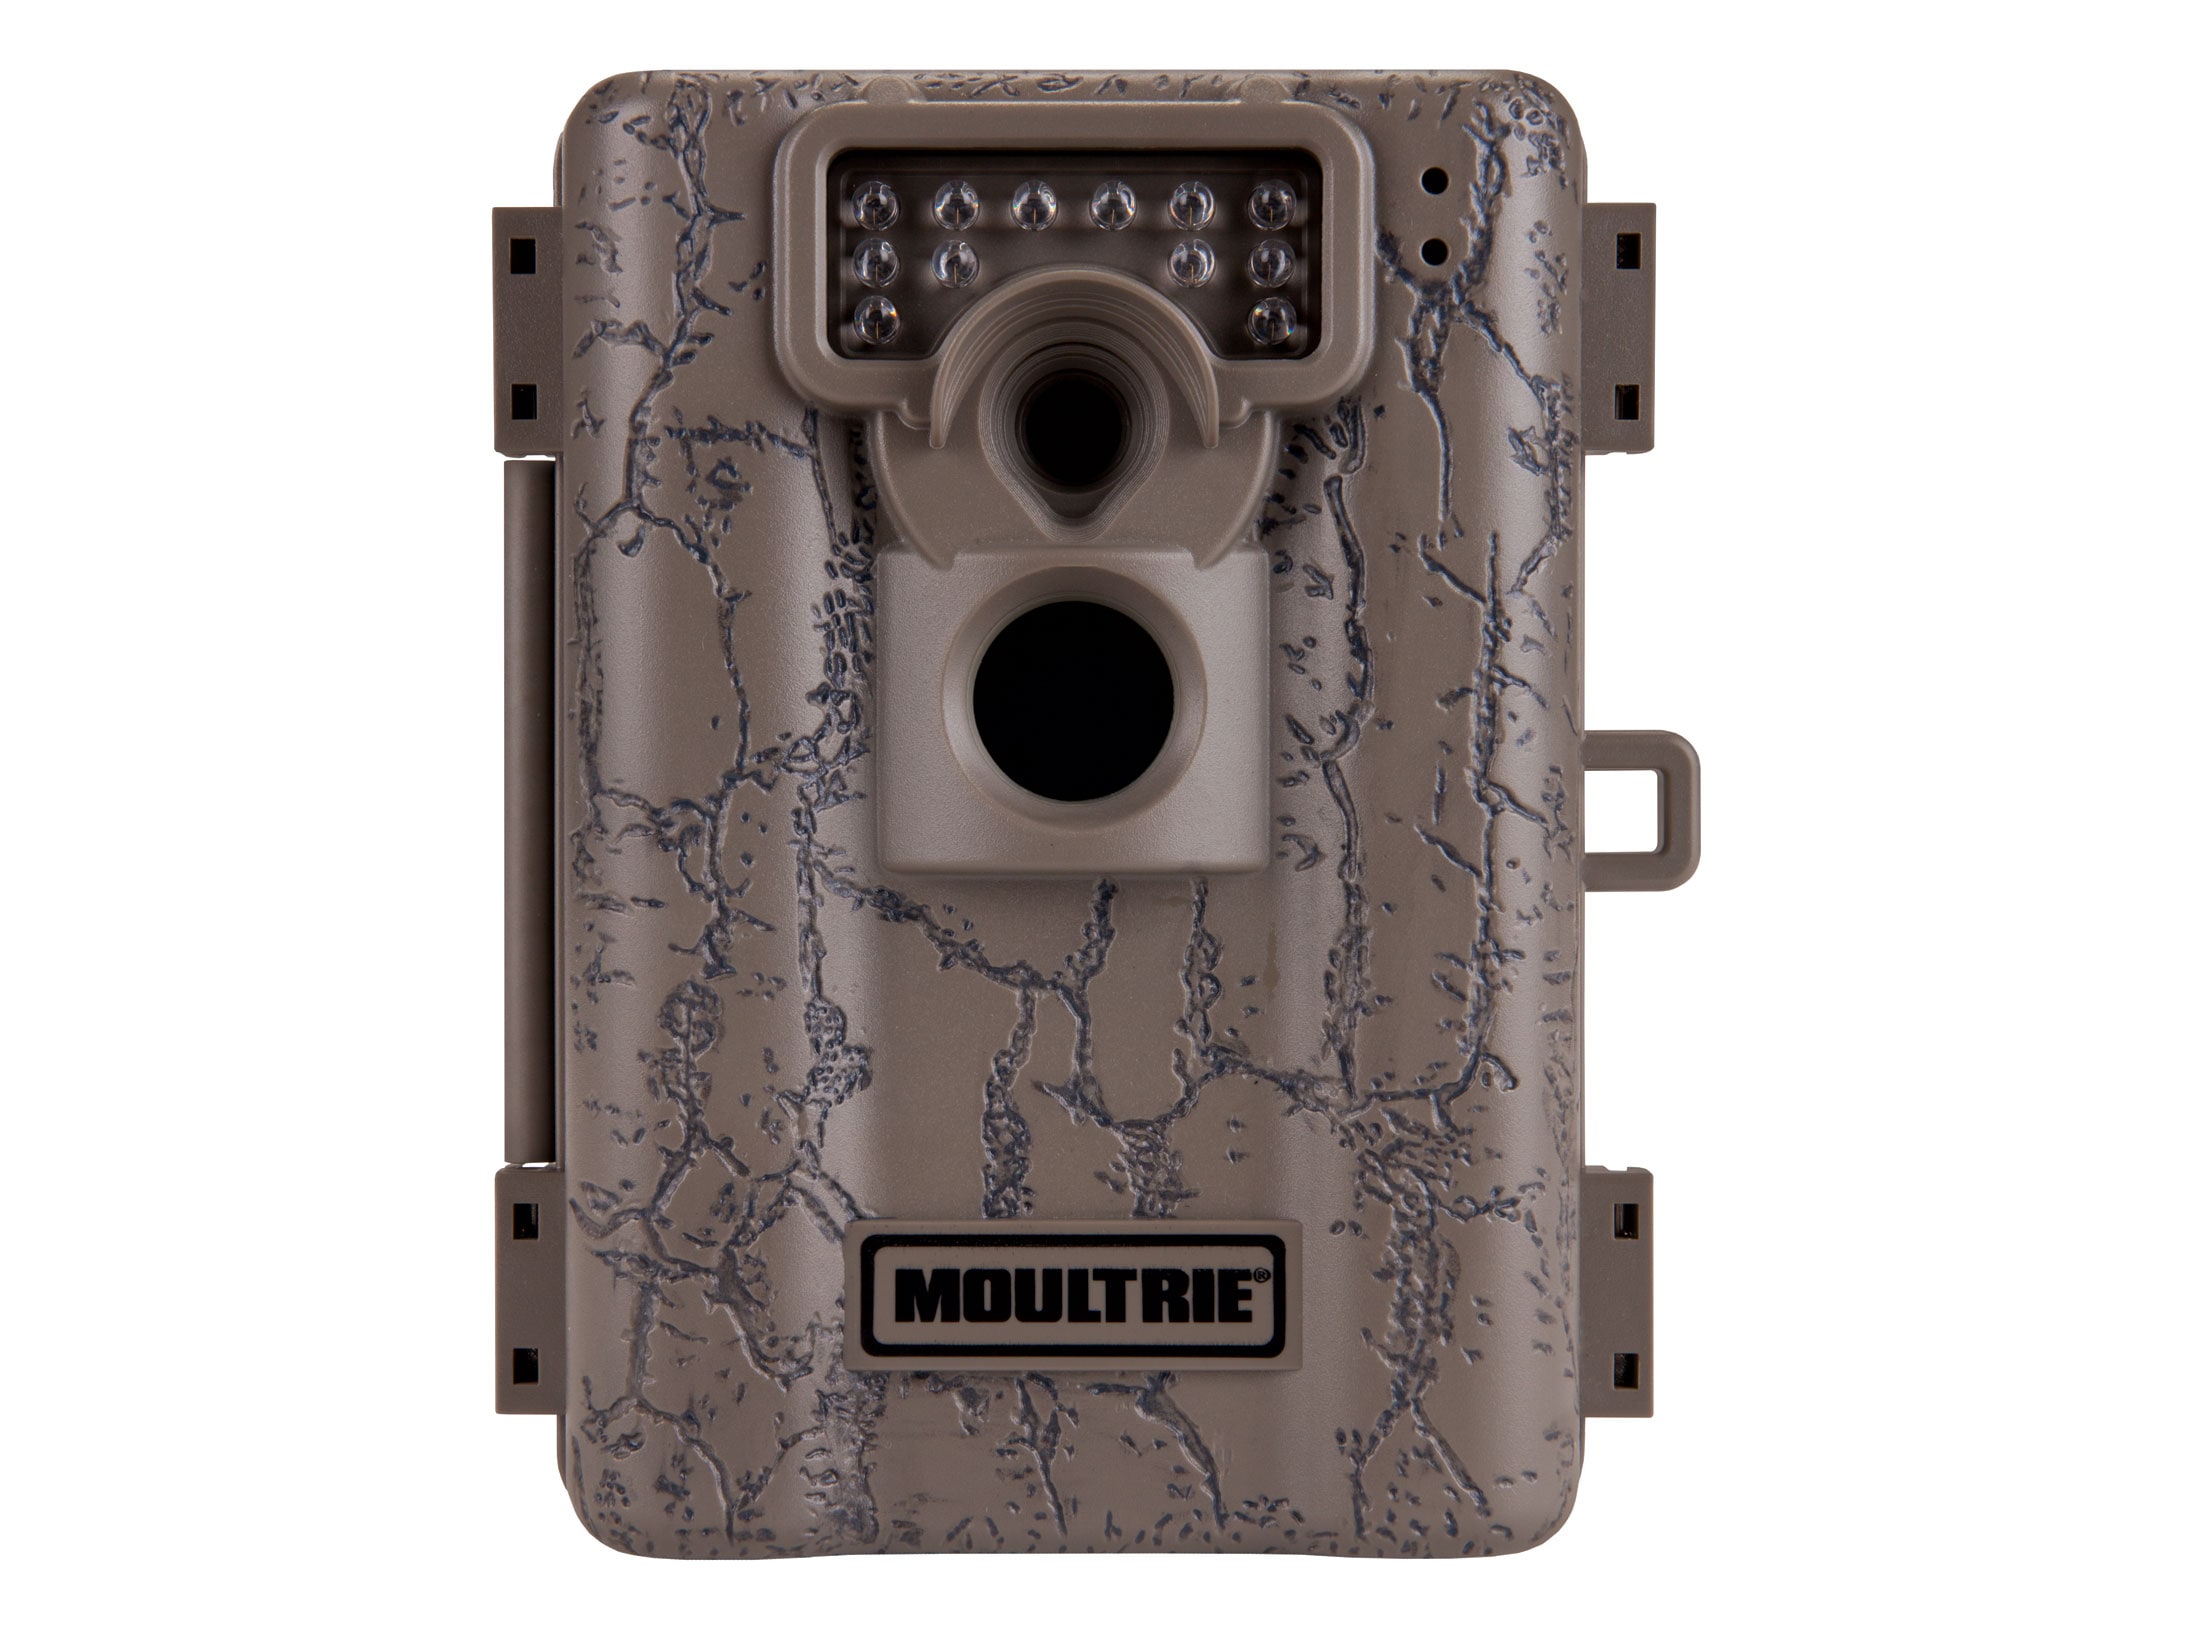 Moultrie A-5 Infrared Game Camera 5.0 Megapixel Tan